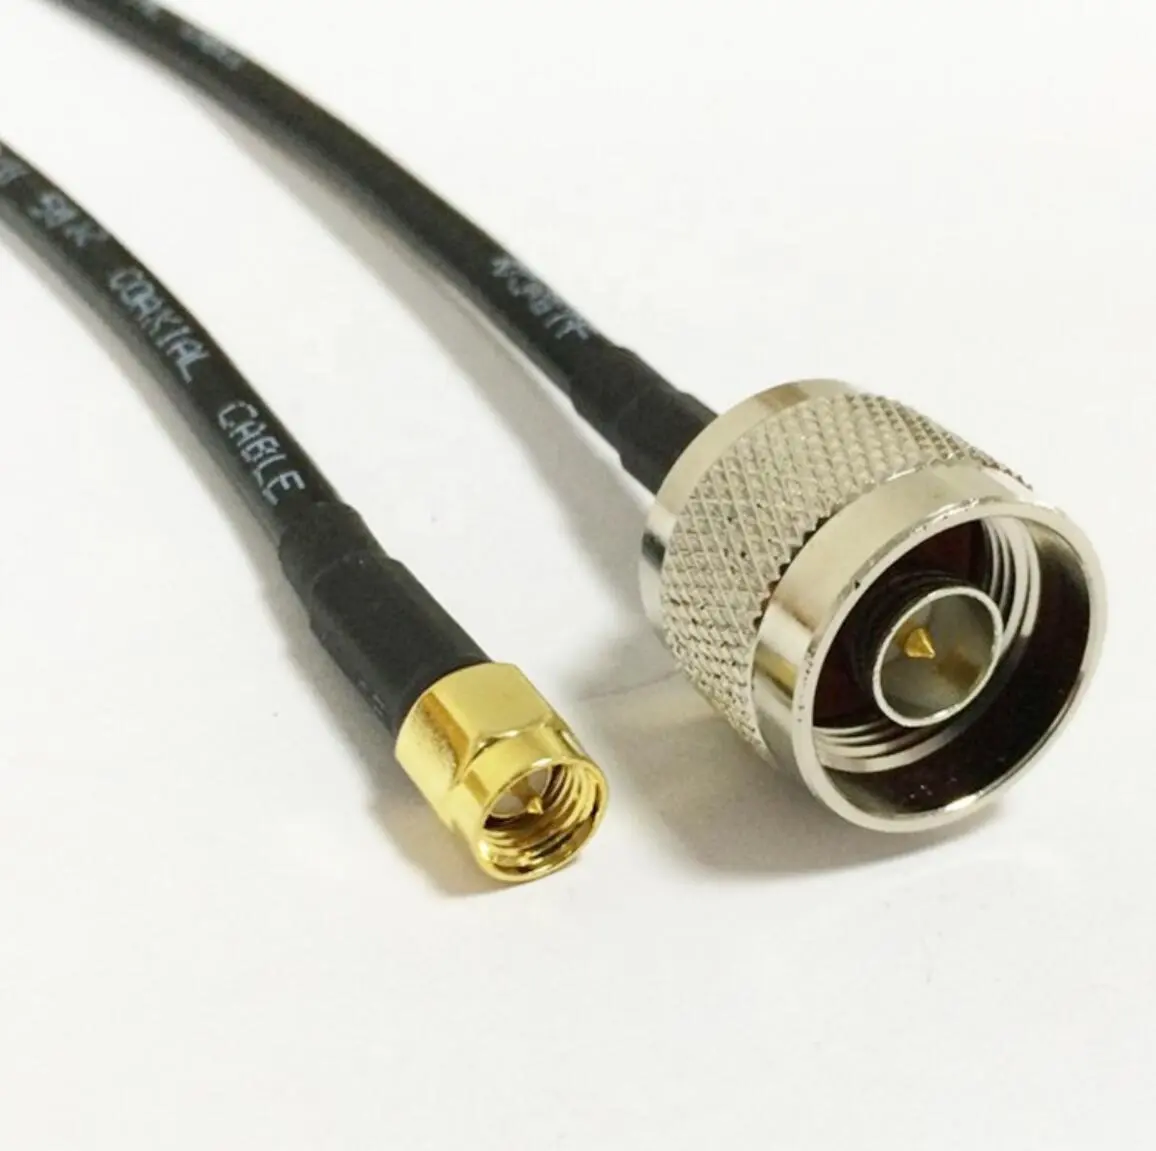 OEM Coaxial assembly Cable 50ohm 75ohm LMR-400 lmr400 N Male to SMA Male rf pigtail for Antenna